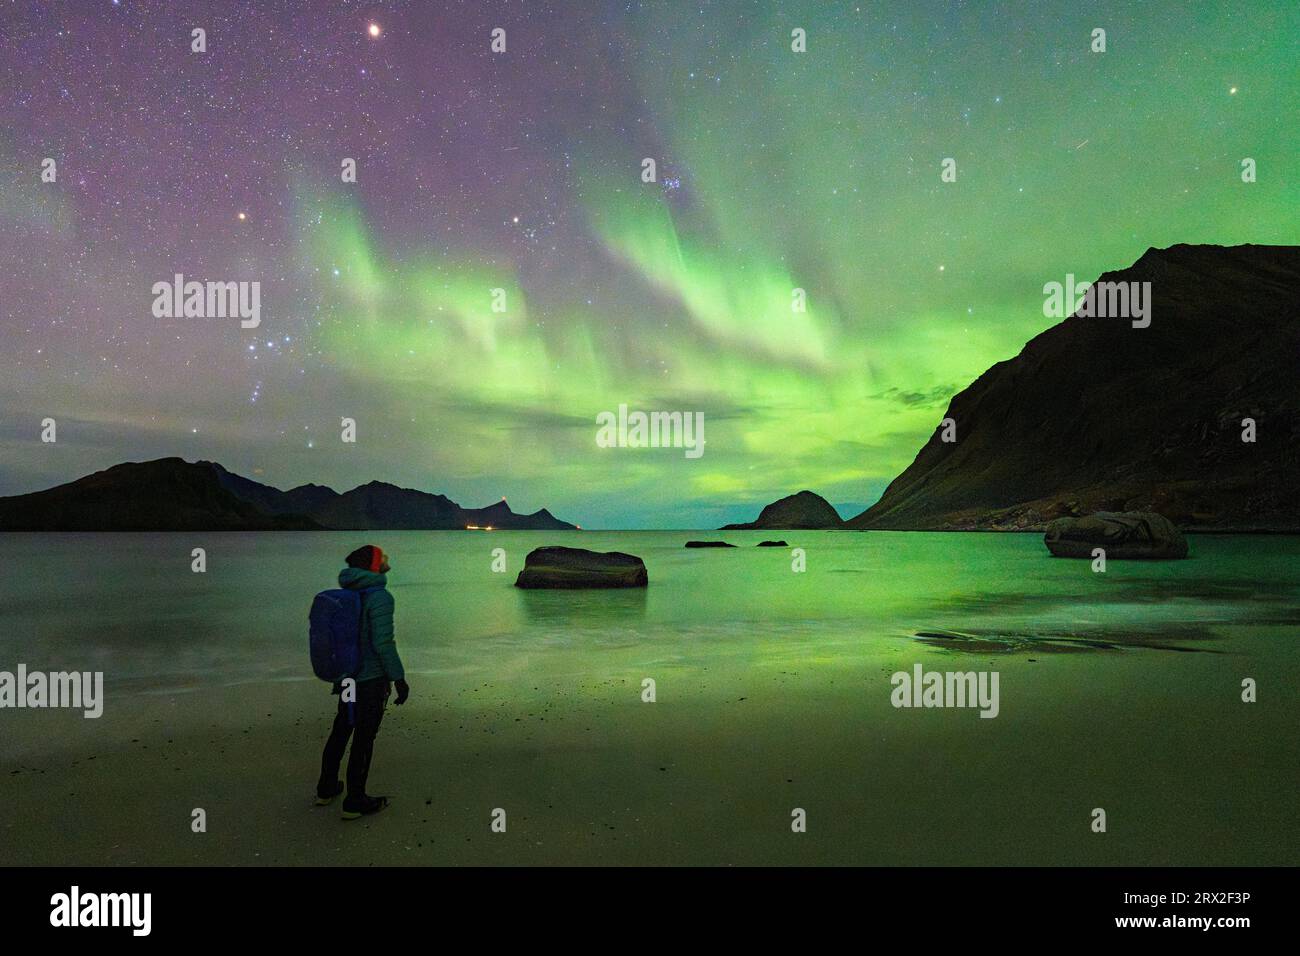 Man with backpack admiring the bright green lights of Aurora Borealis (Northern Lights) from Haukland beach, Lofoten Islands, Nordland, Norway Stock Photo